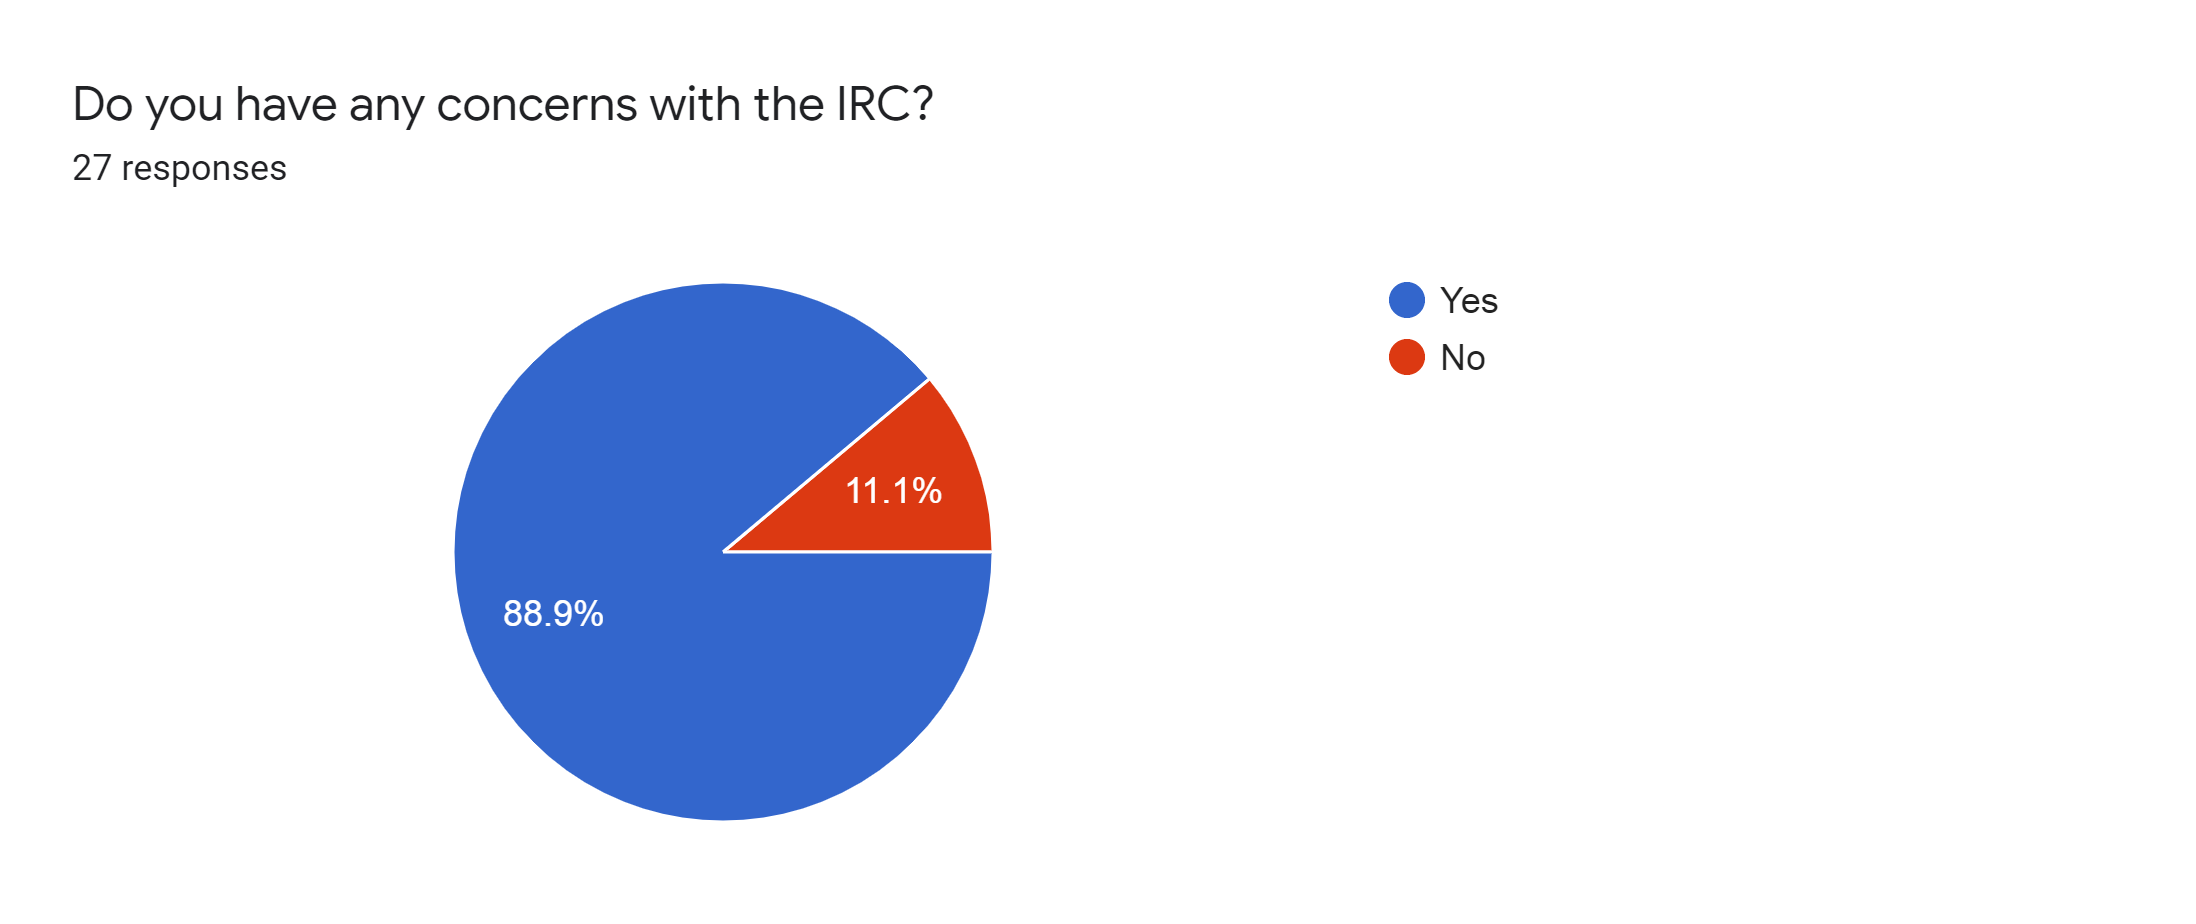 Forms response chart. Question title: Do you have any concerns with the IRC?. Number of responses: 27 responses.